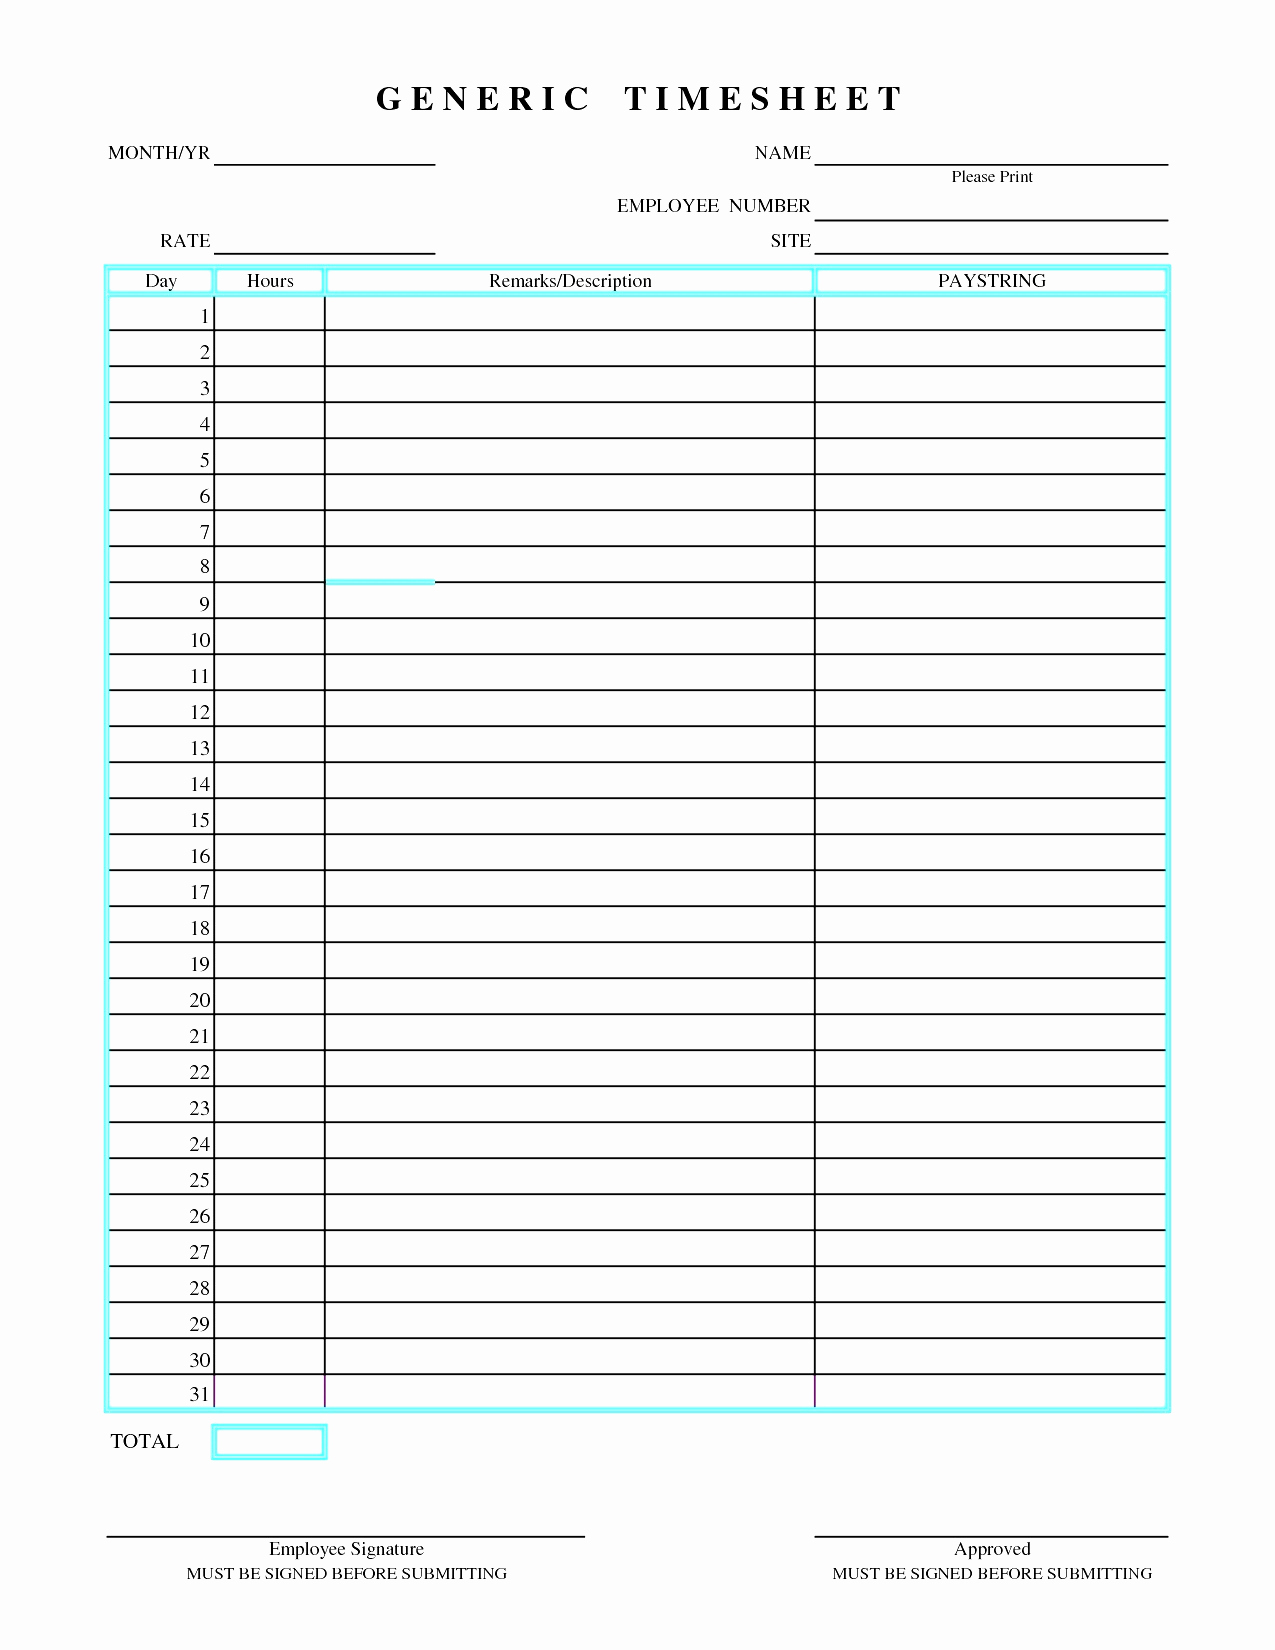 Applicant Tracking Spreadsheet Download Free Luxury Recruitment intended for Applicant Tracking Spreadsheet Template